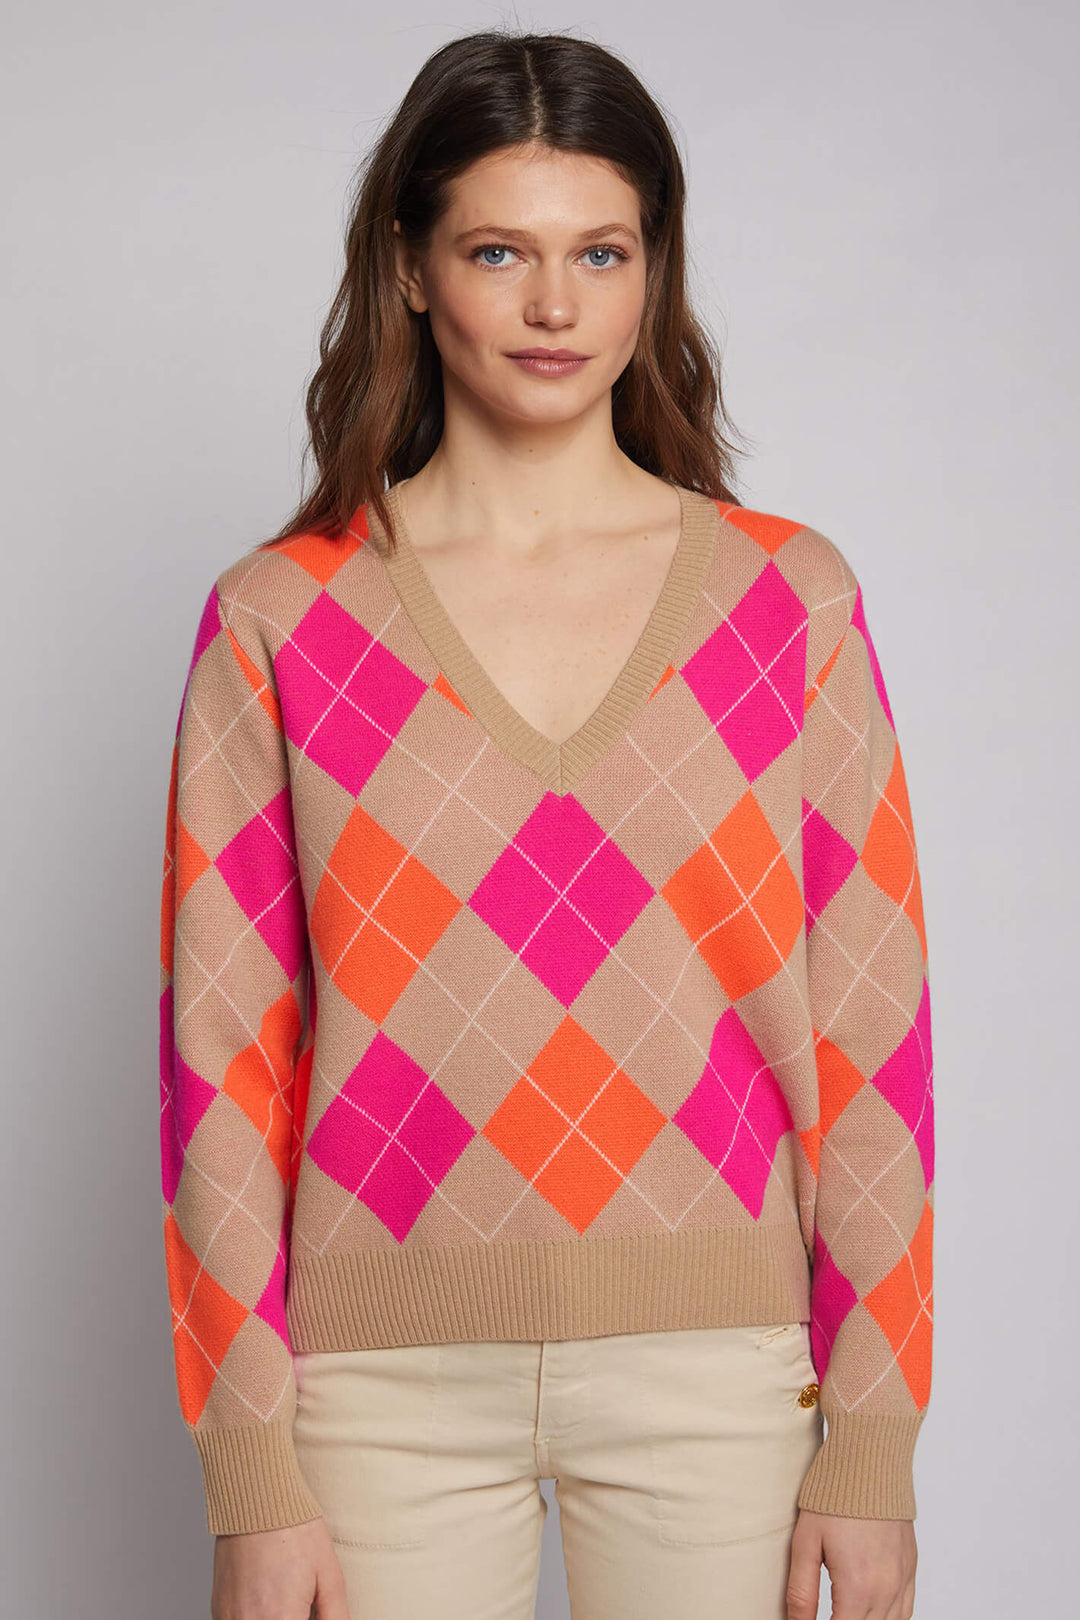 Vilagallo 30480 Neon Argyle Knitted Wool Jumper - Experience Boutique